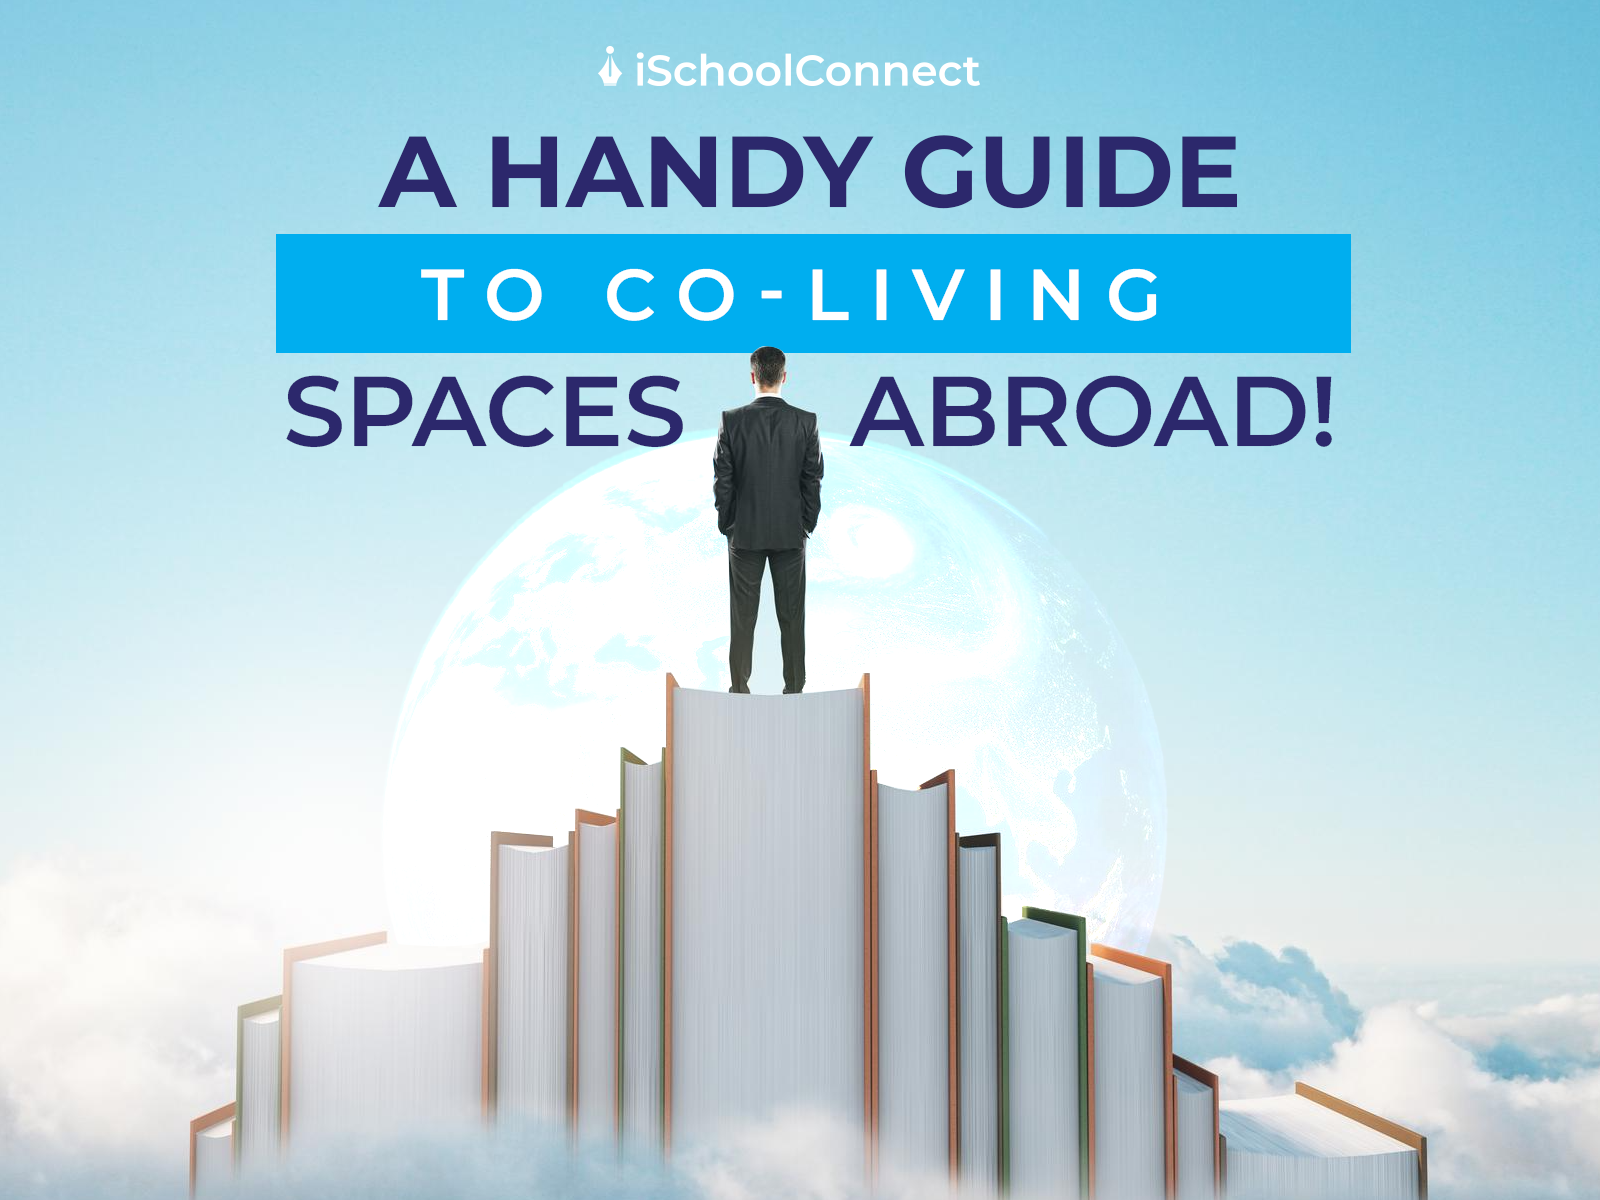 The rise of co-living spaces for international students